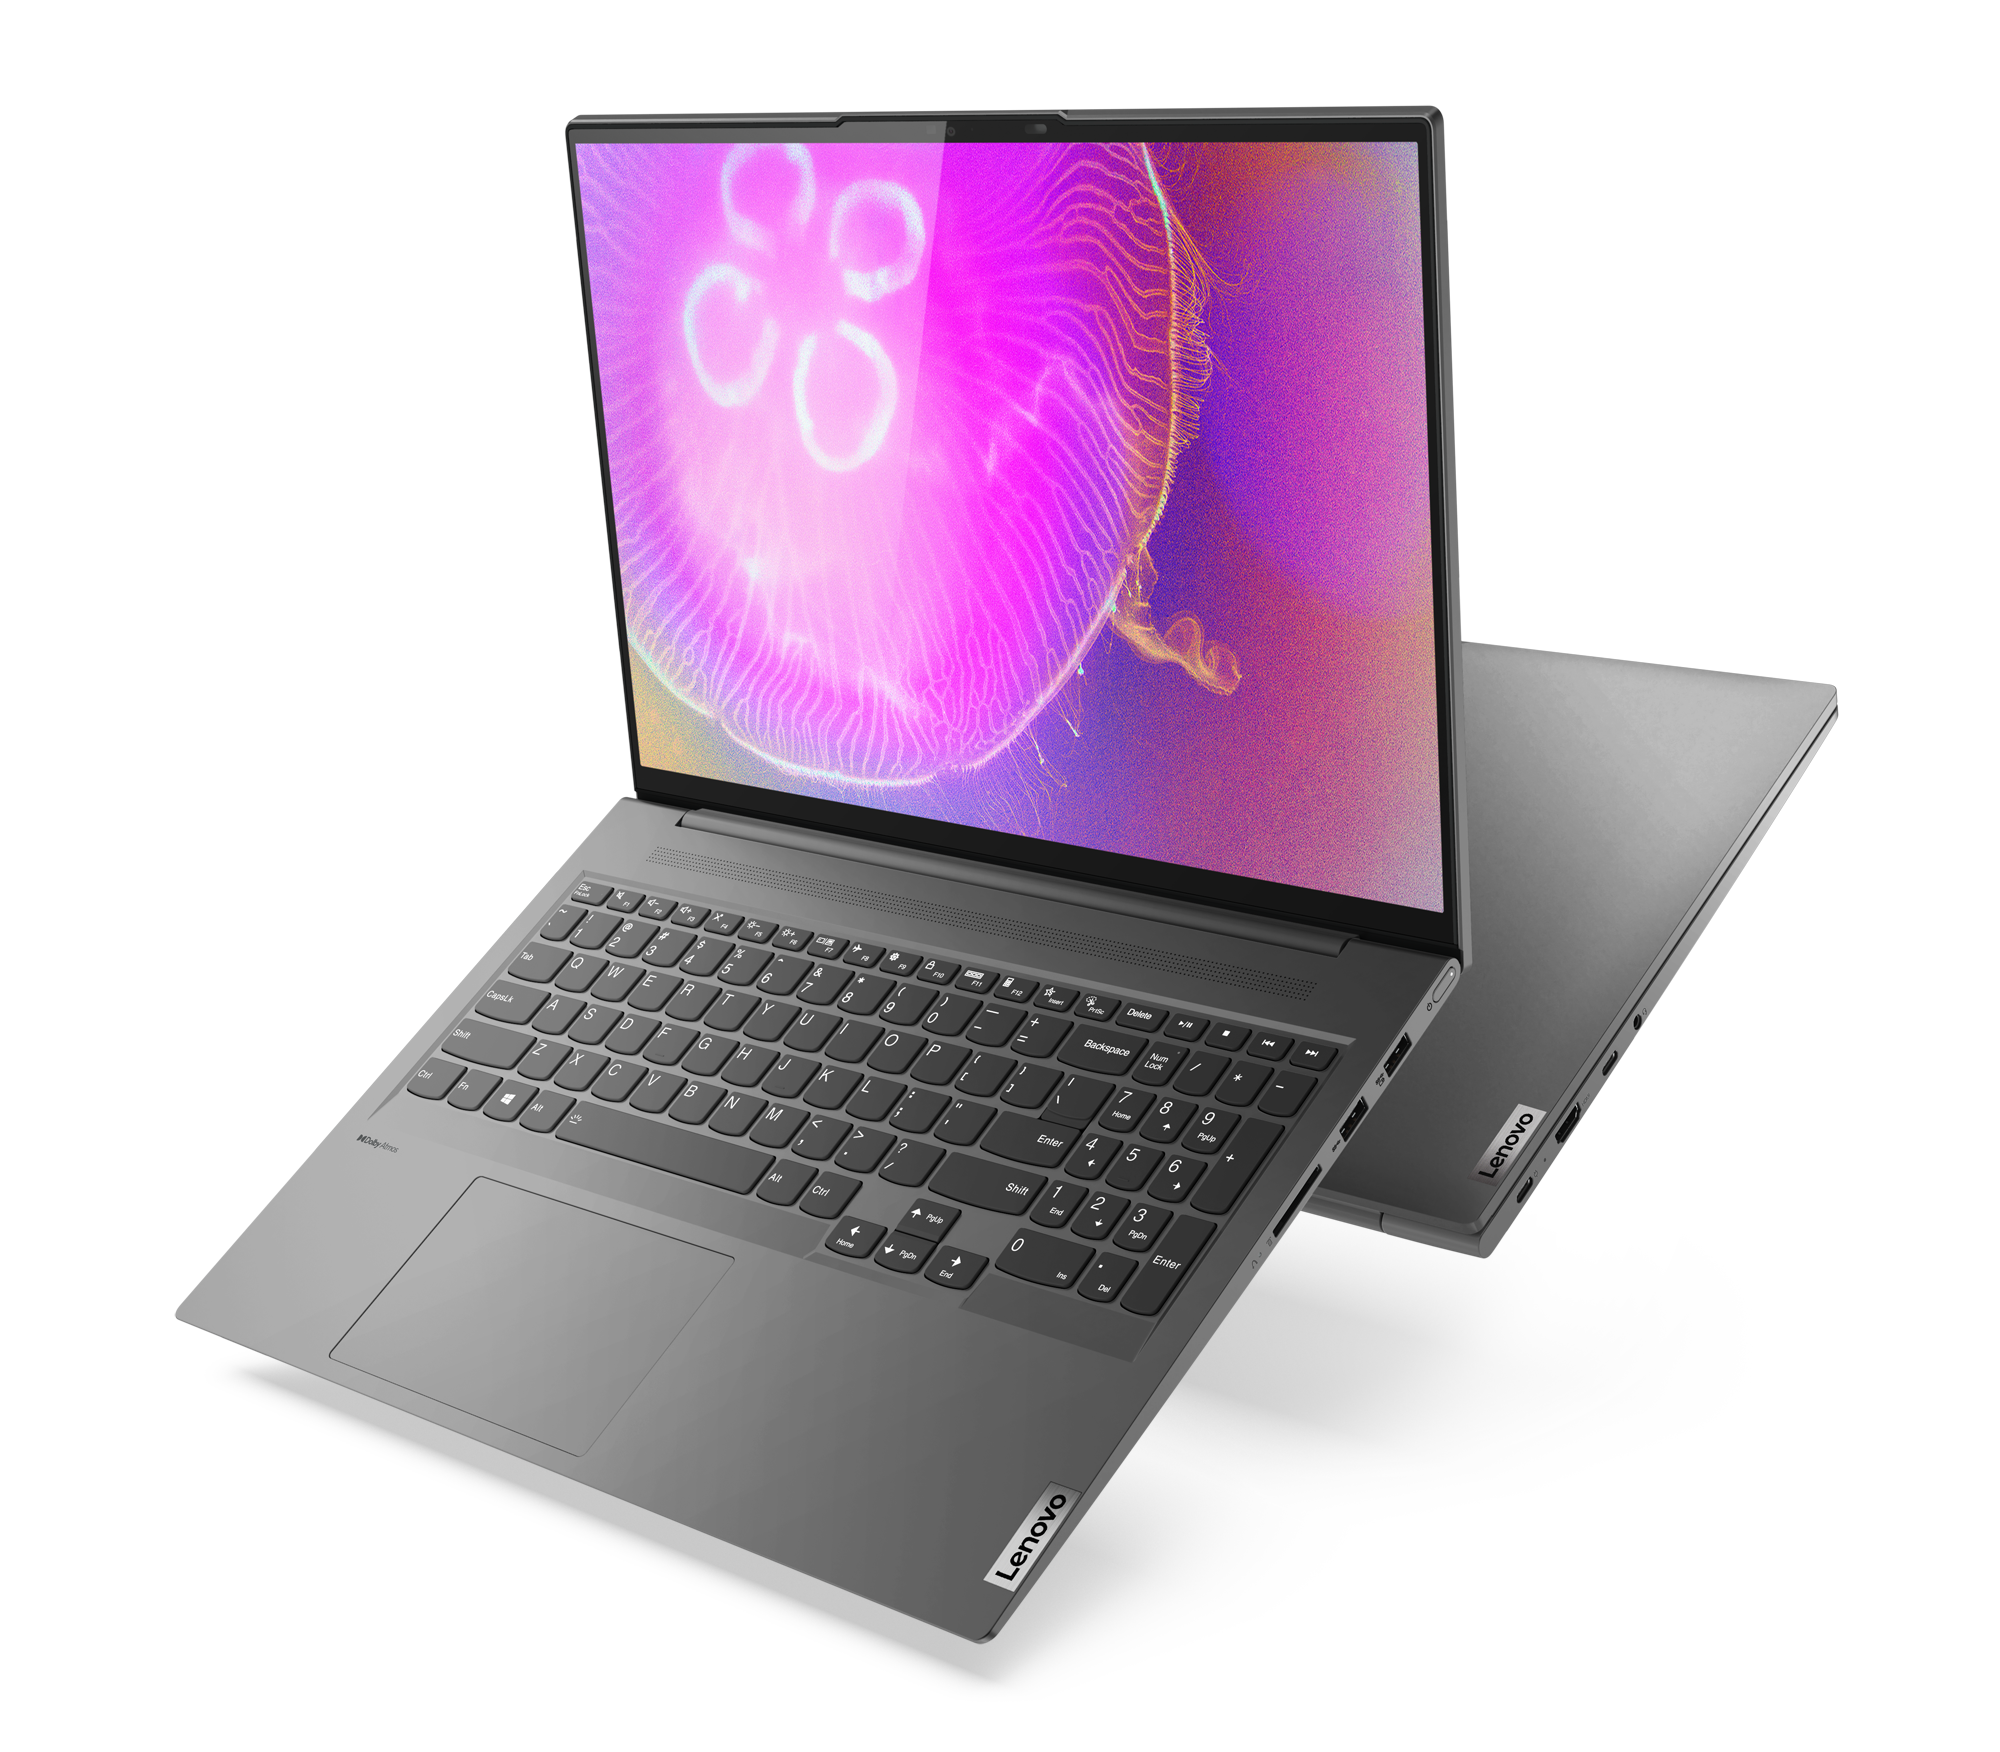 Lenovo Yoga Slim 7 Pro 16 launched with 80 W AMD Ryzen 7 5800H and Nvidia GeForce RTX 3050 - NotebookCheck.net News